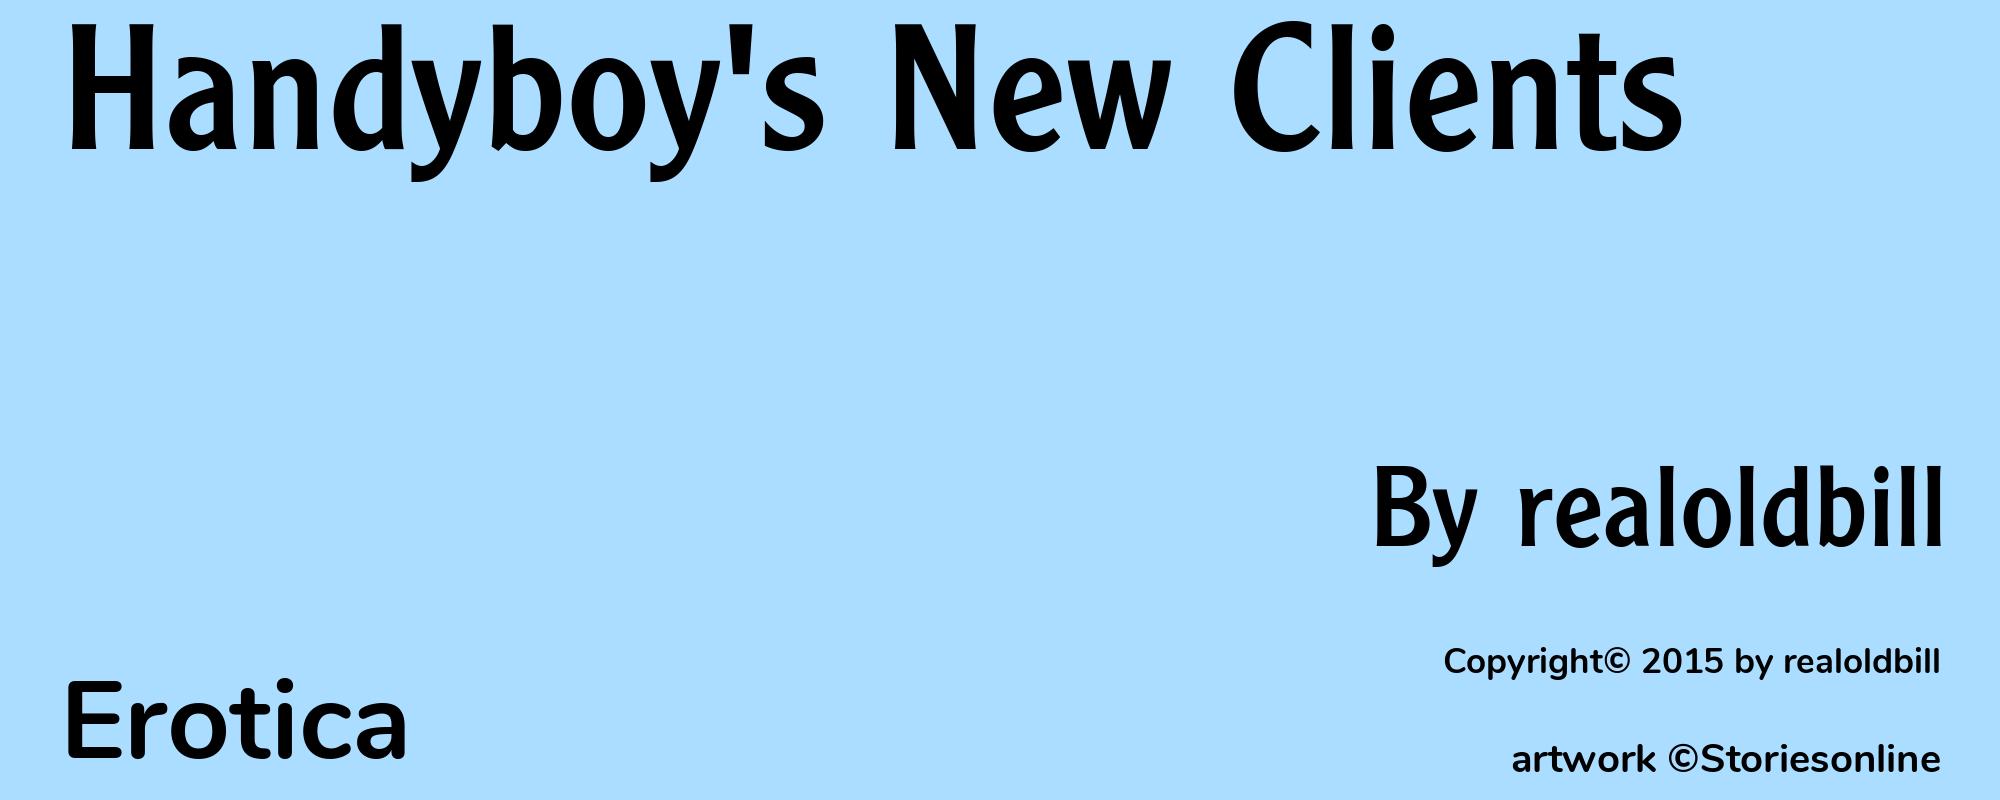 Handyboy's New Clients - Cover